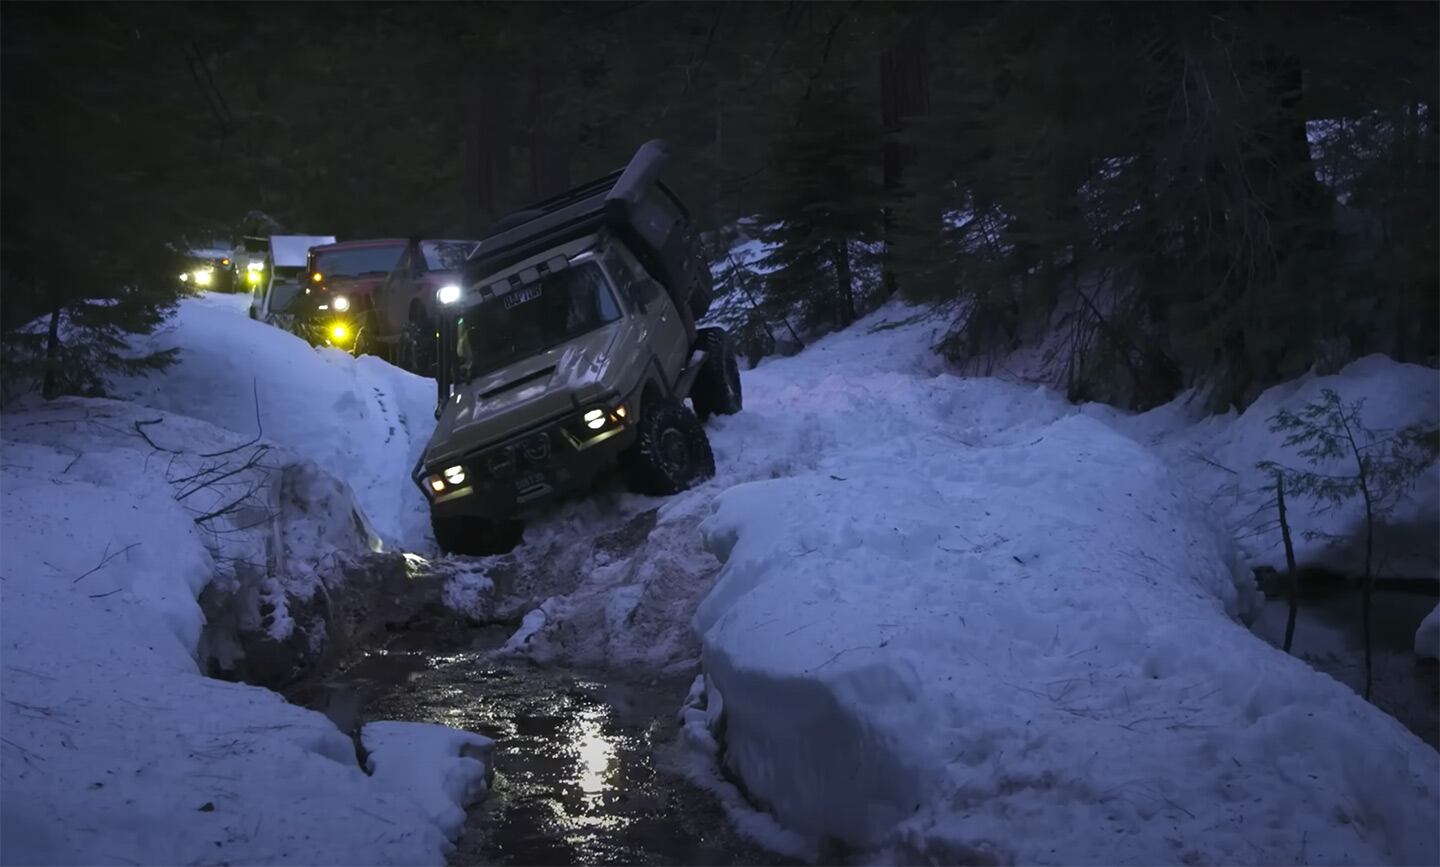 Snow wheeling can get a bit spicy.